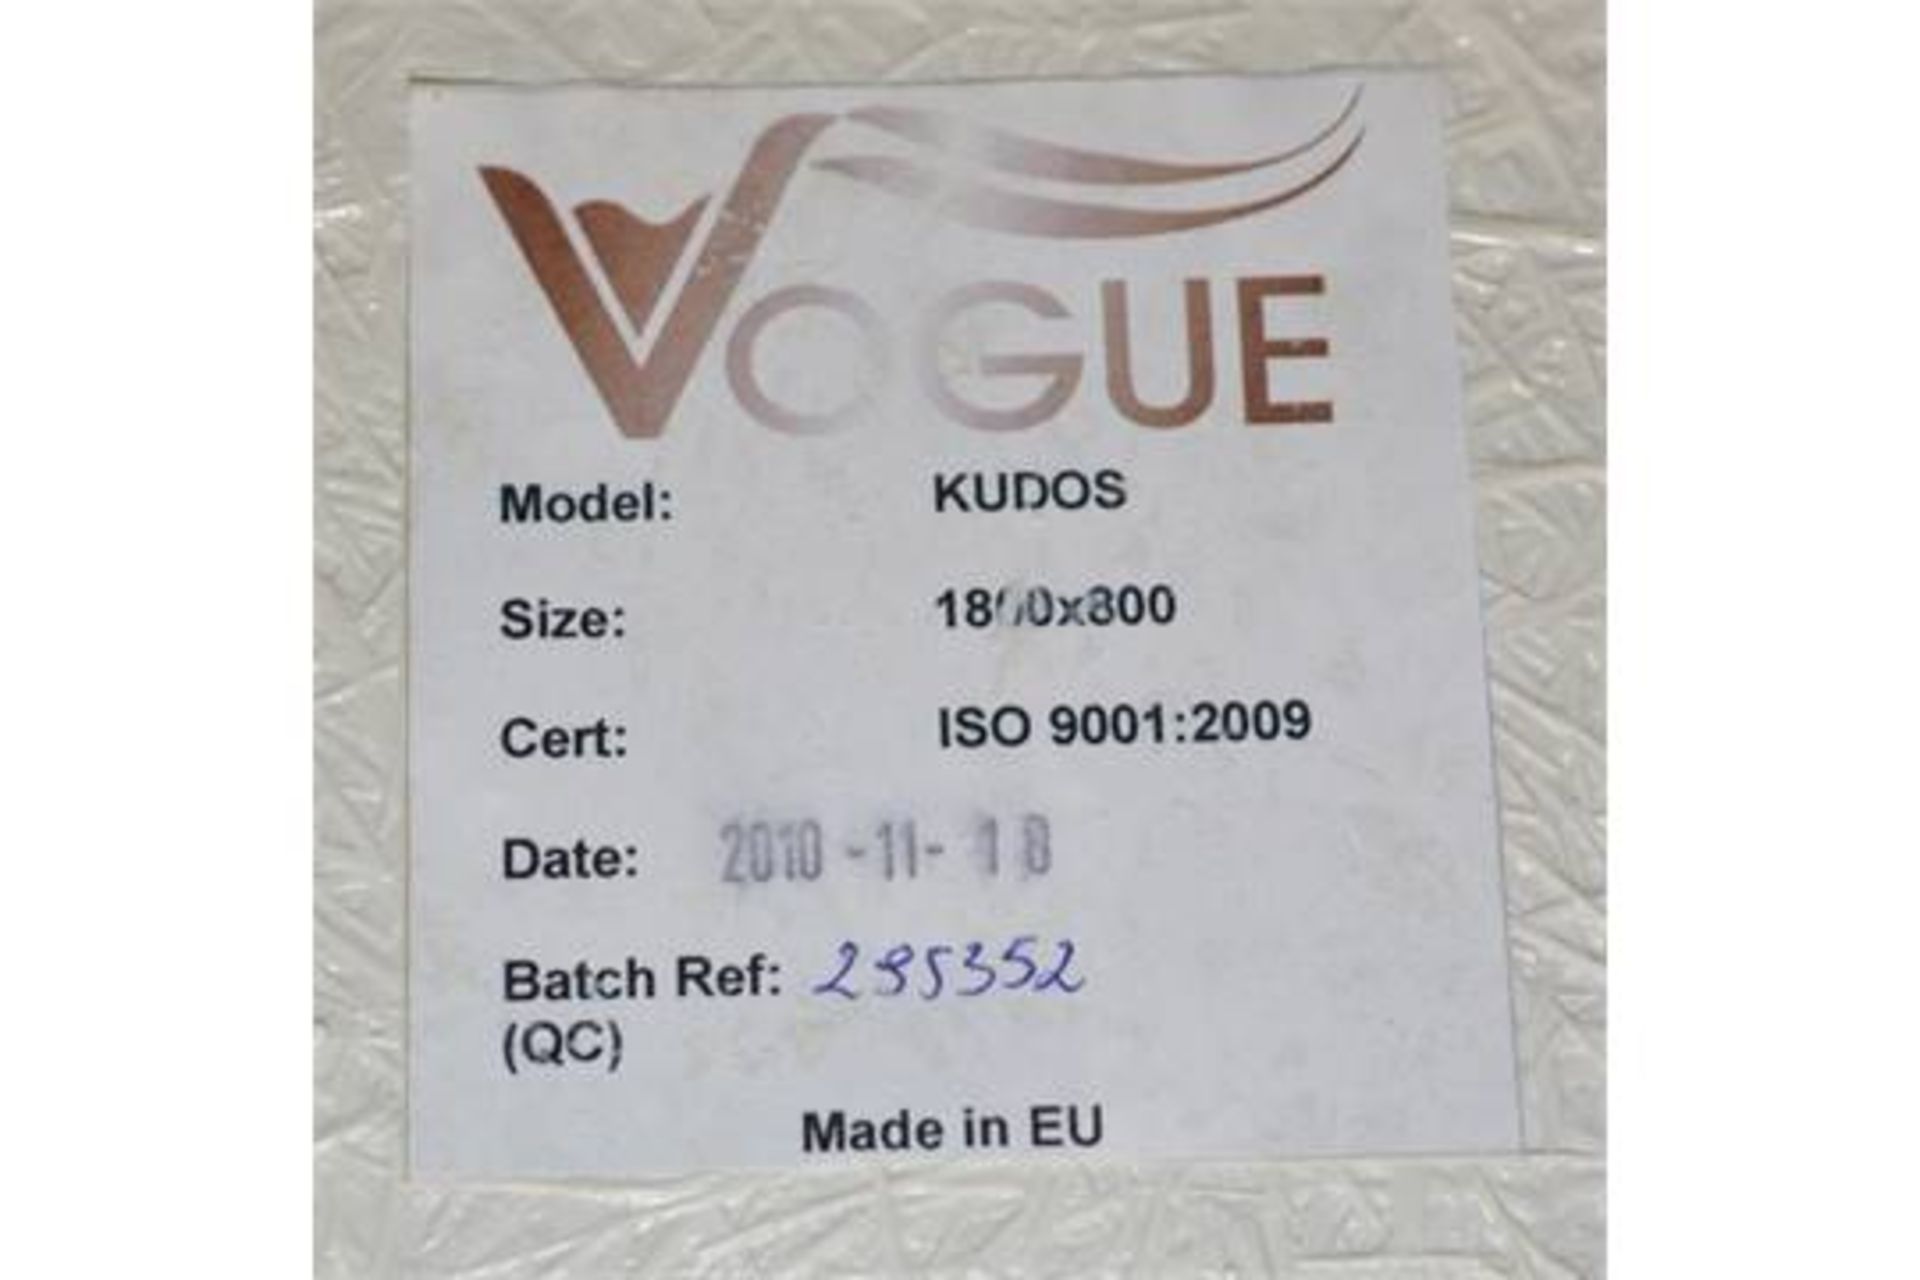 1 x Kudos Single End Inset Bath Tub - Vogue Bathrooms - 1800x800mm - Brand New Stock - Ref P6 - High - Image 2 of 3